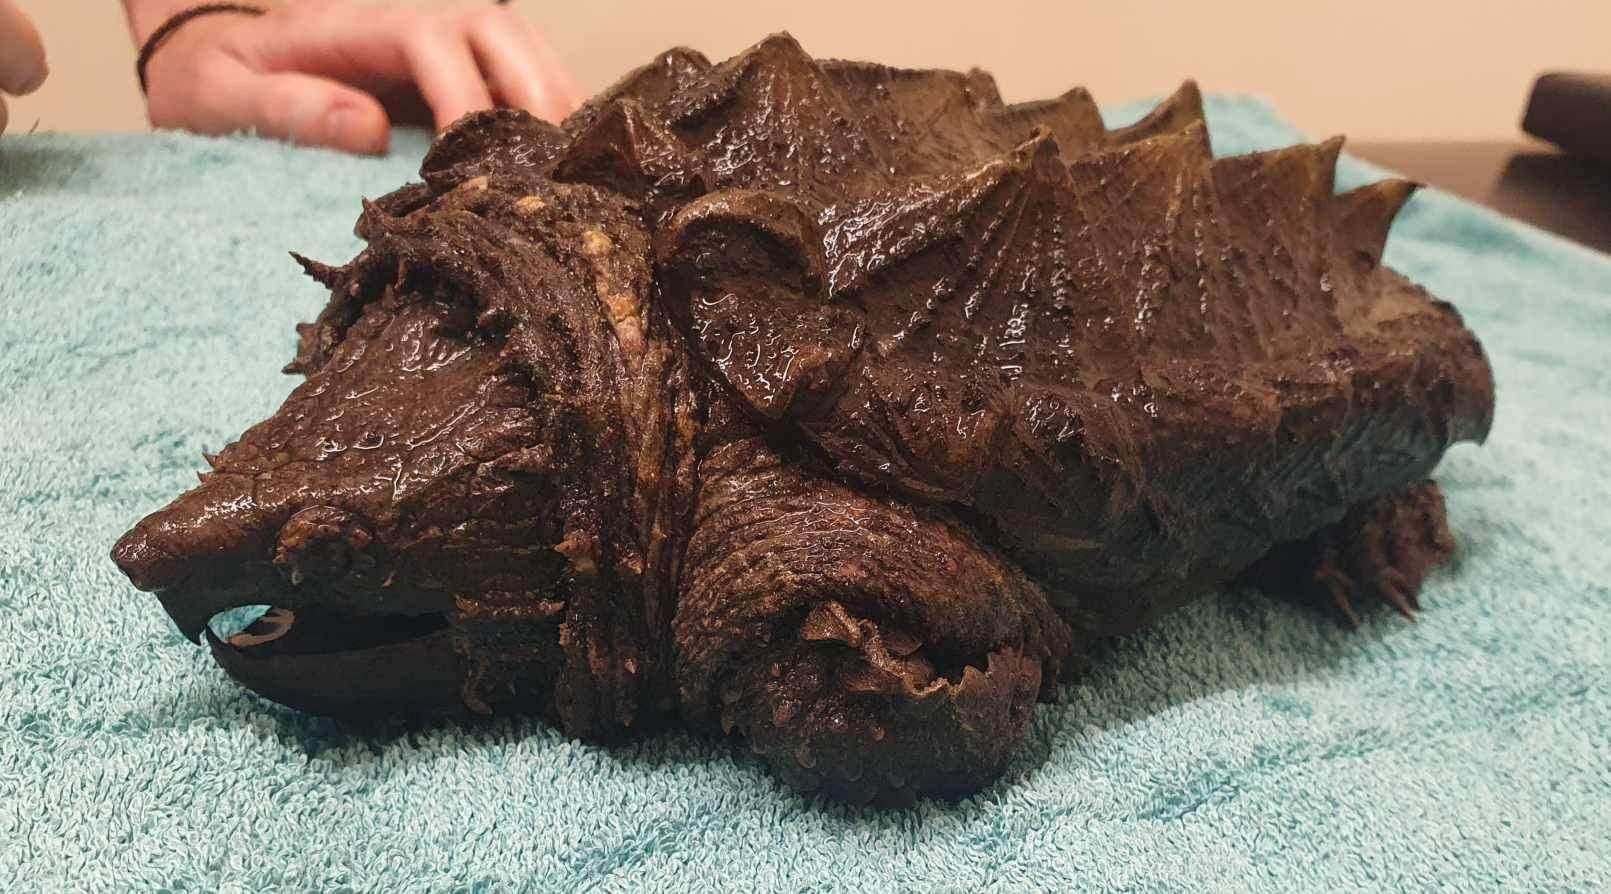 Dr Kate Hornby said the alligator snapping turtle could ‘certainly give you a nasty nip’ (Wild Side Vets/PA)